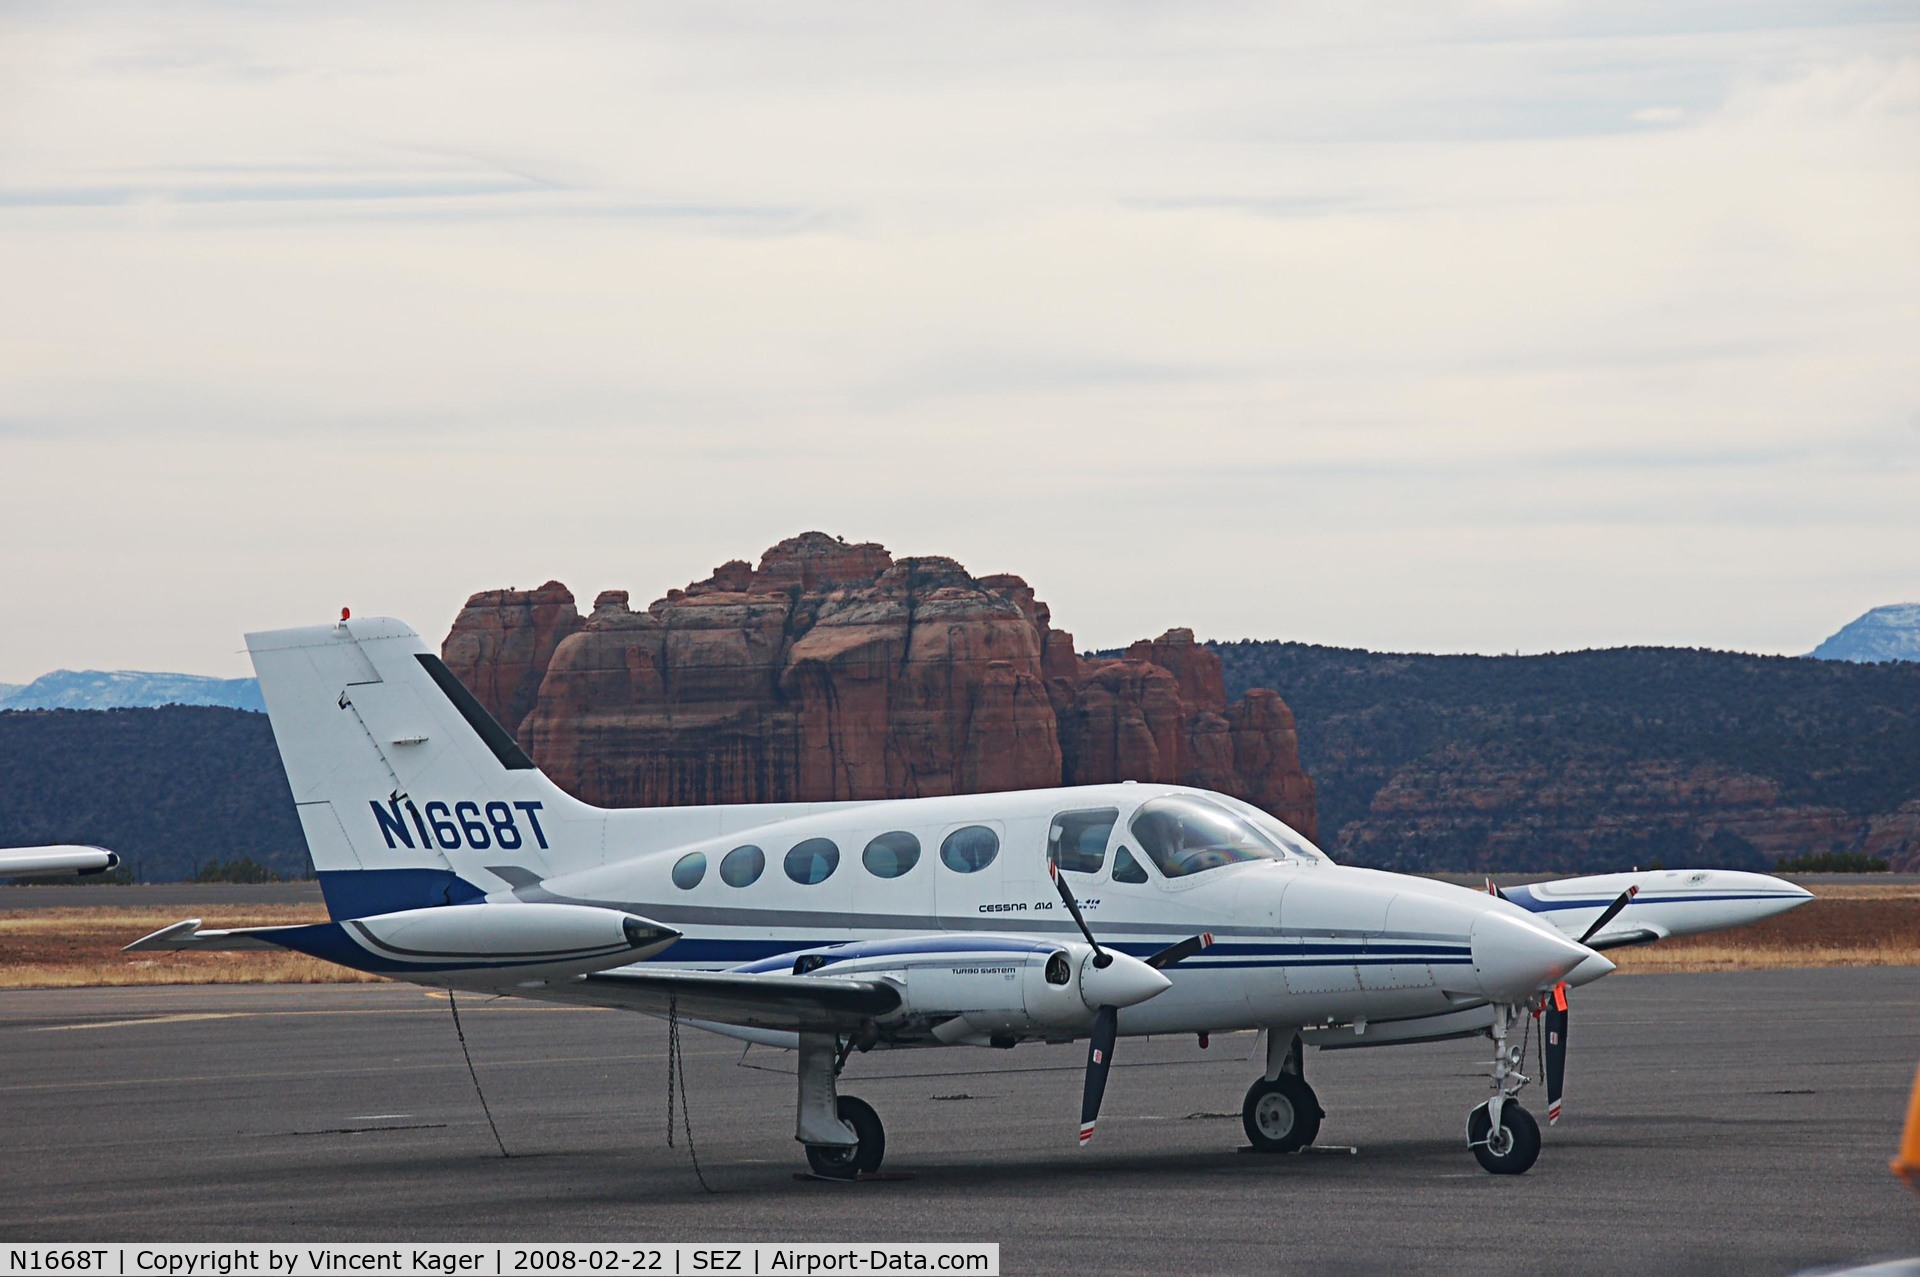 N1668T, 1973 Cessna 414 Chancellor C/N 414-0461, Cessna 414 and red rock